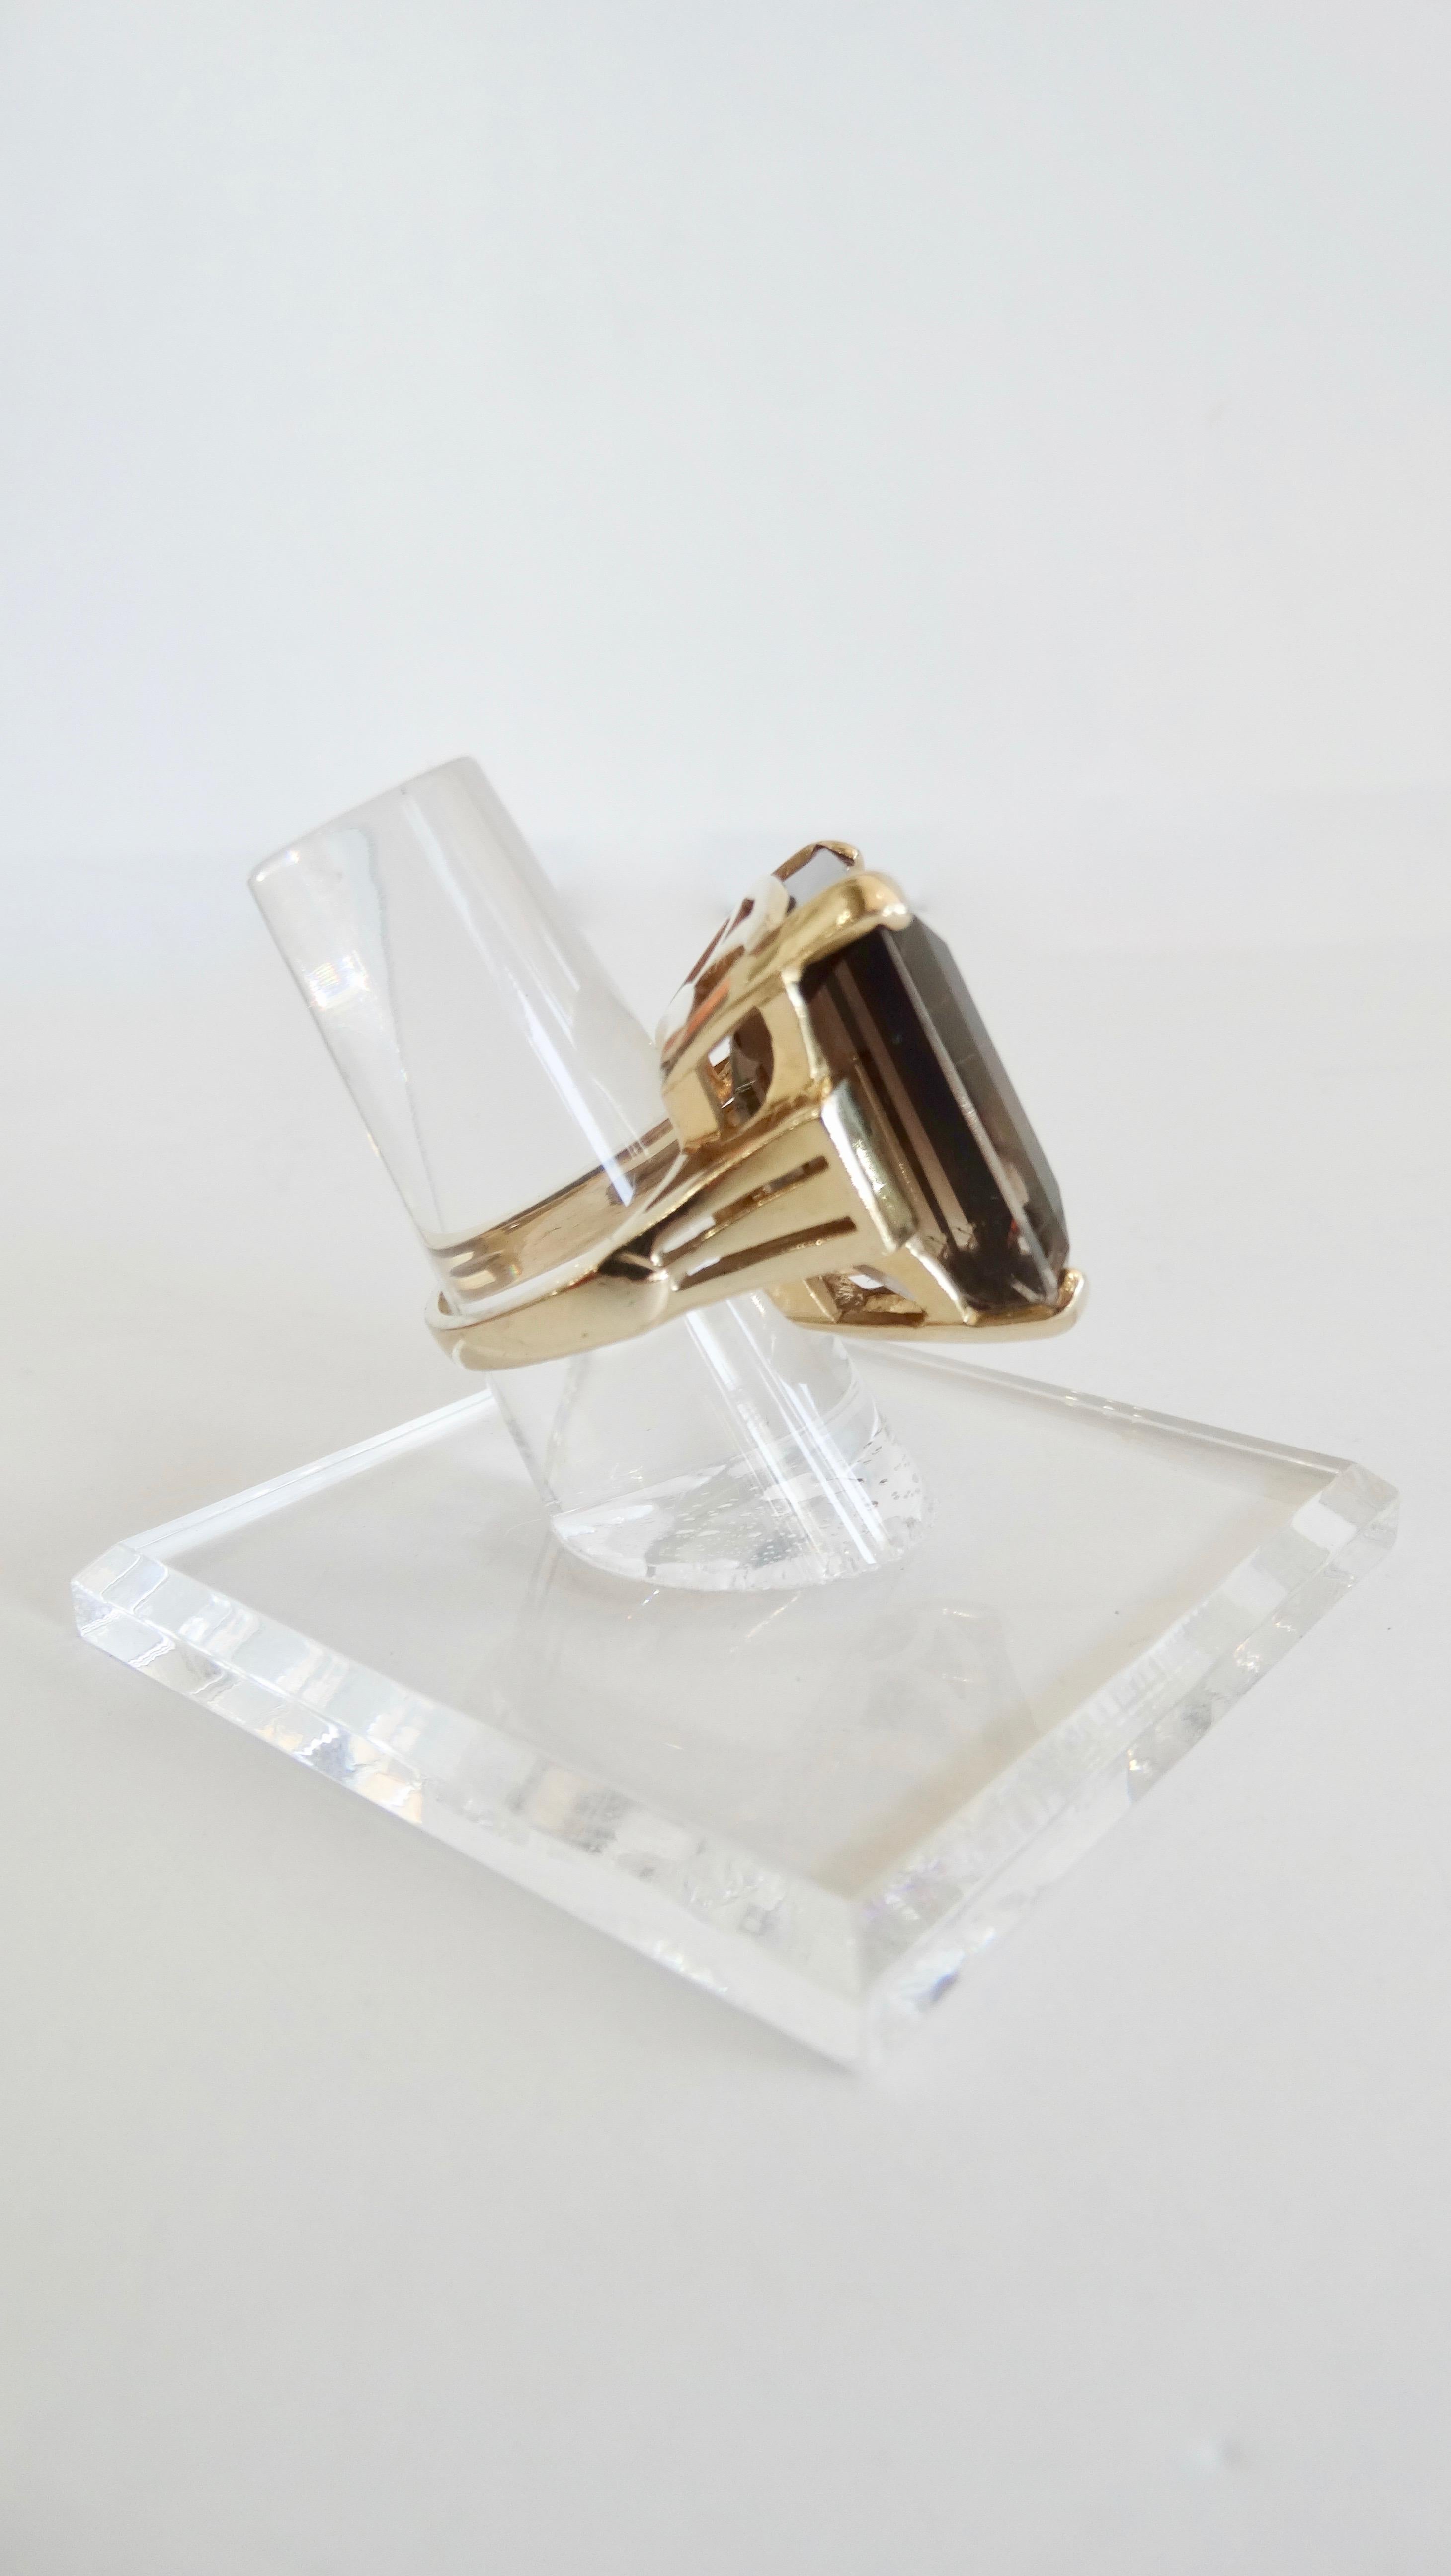 Gorgeous and timeless cocktail ring circa 1950s. Features a 35 carat smoky Quartz in a beautiful Emerald cut set in a 14k yellow Gold band.  Width at top measures 27mm, height measures 15mm and bottom width measures 4.54mm. 20.1 grams in weight and